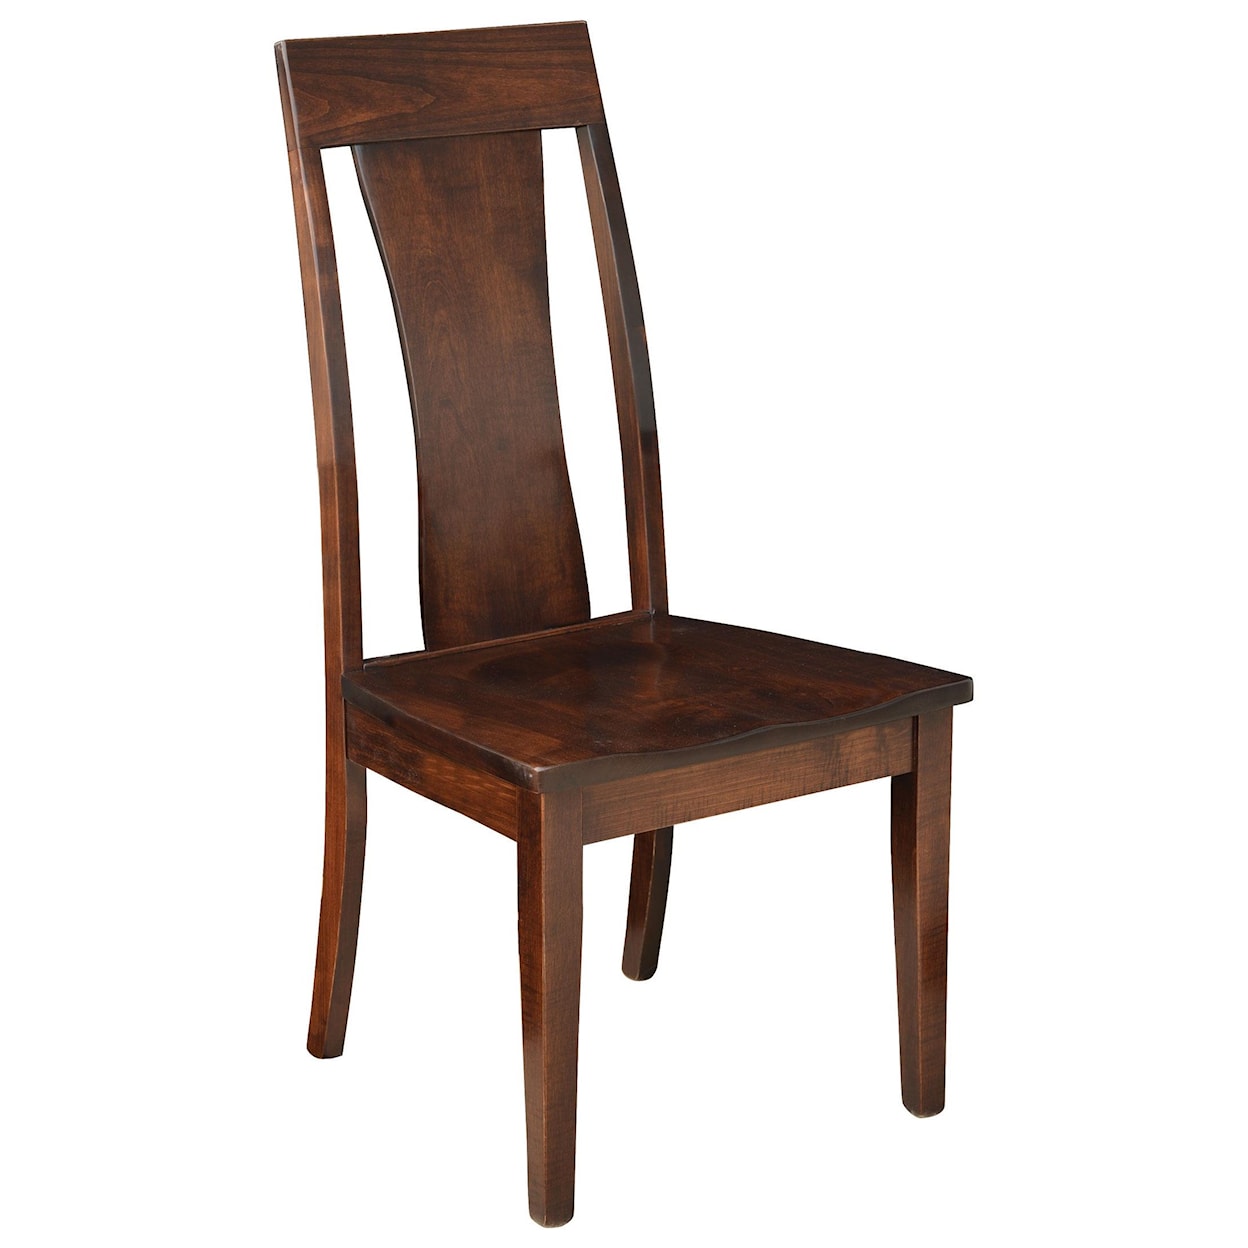 Wengerd Wood Products Loudon Side Chair